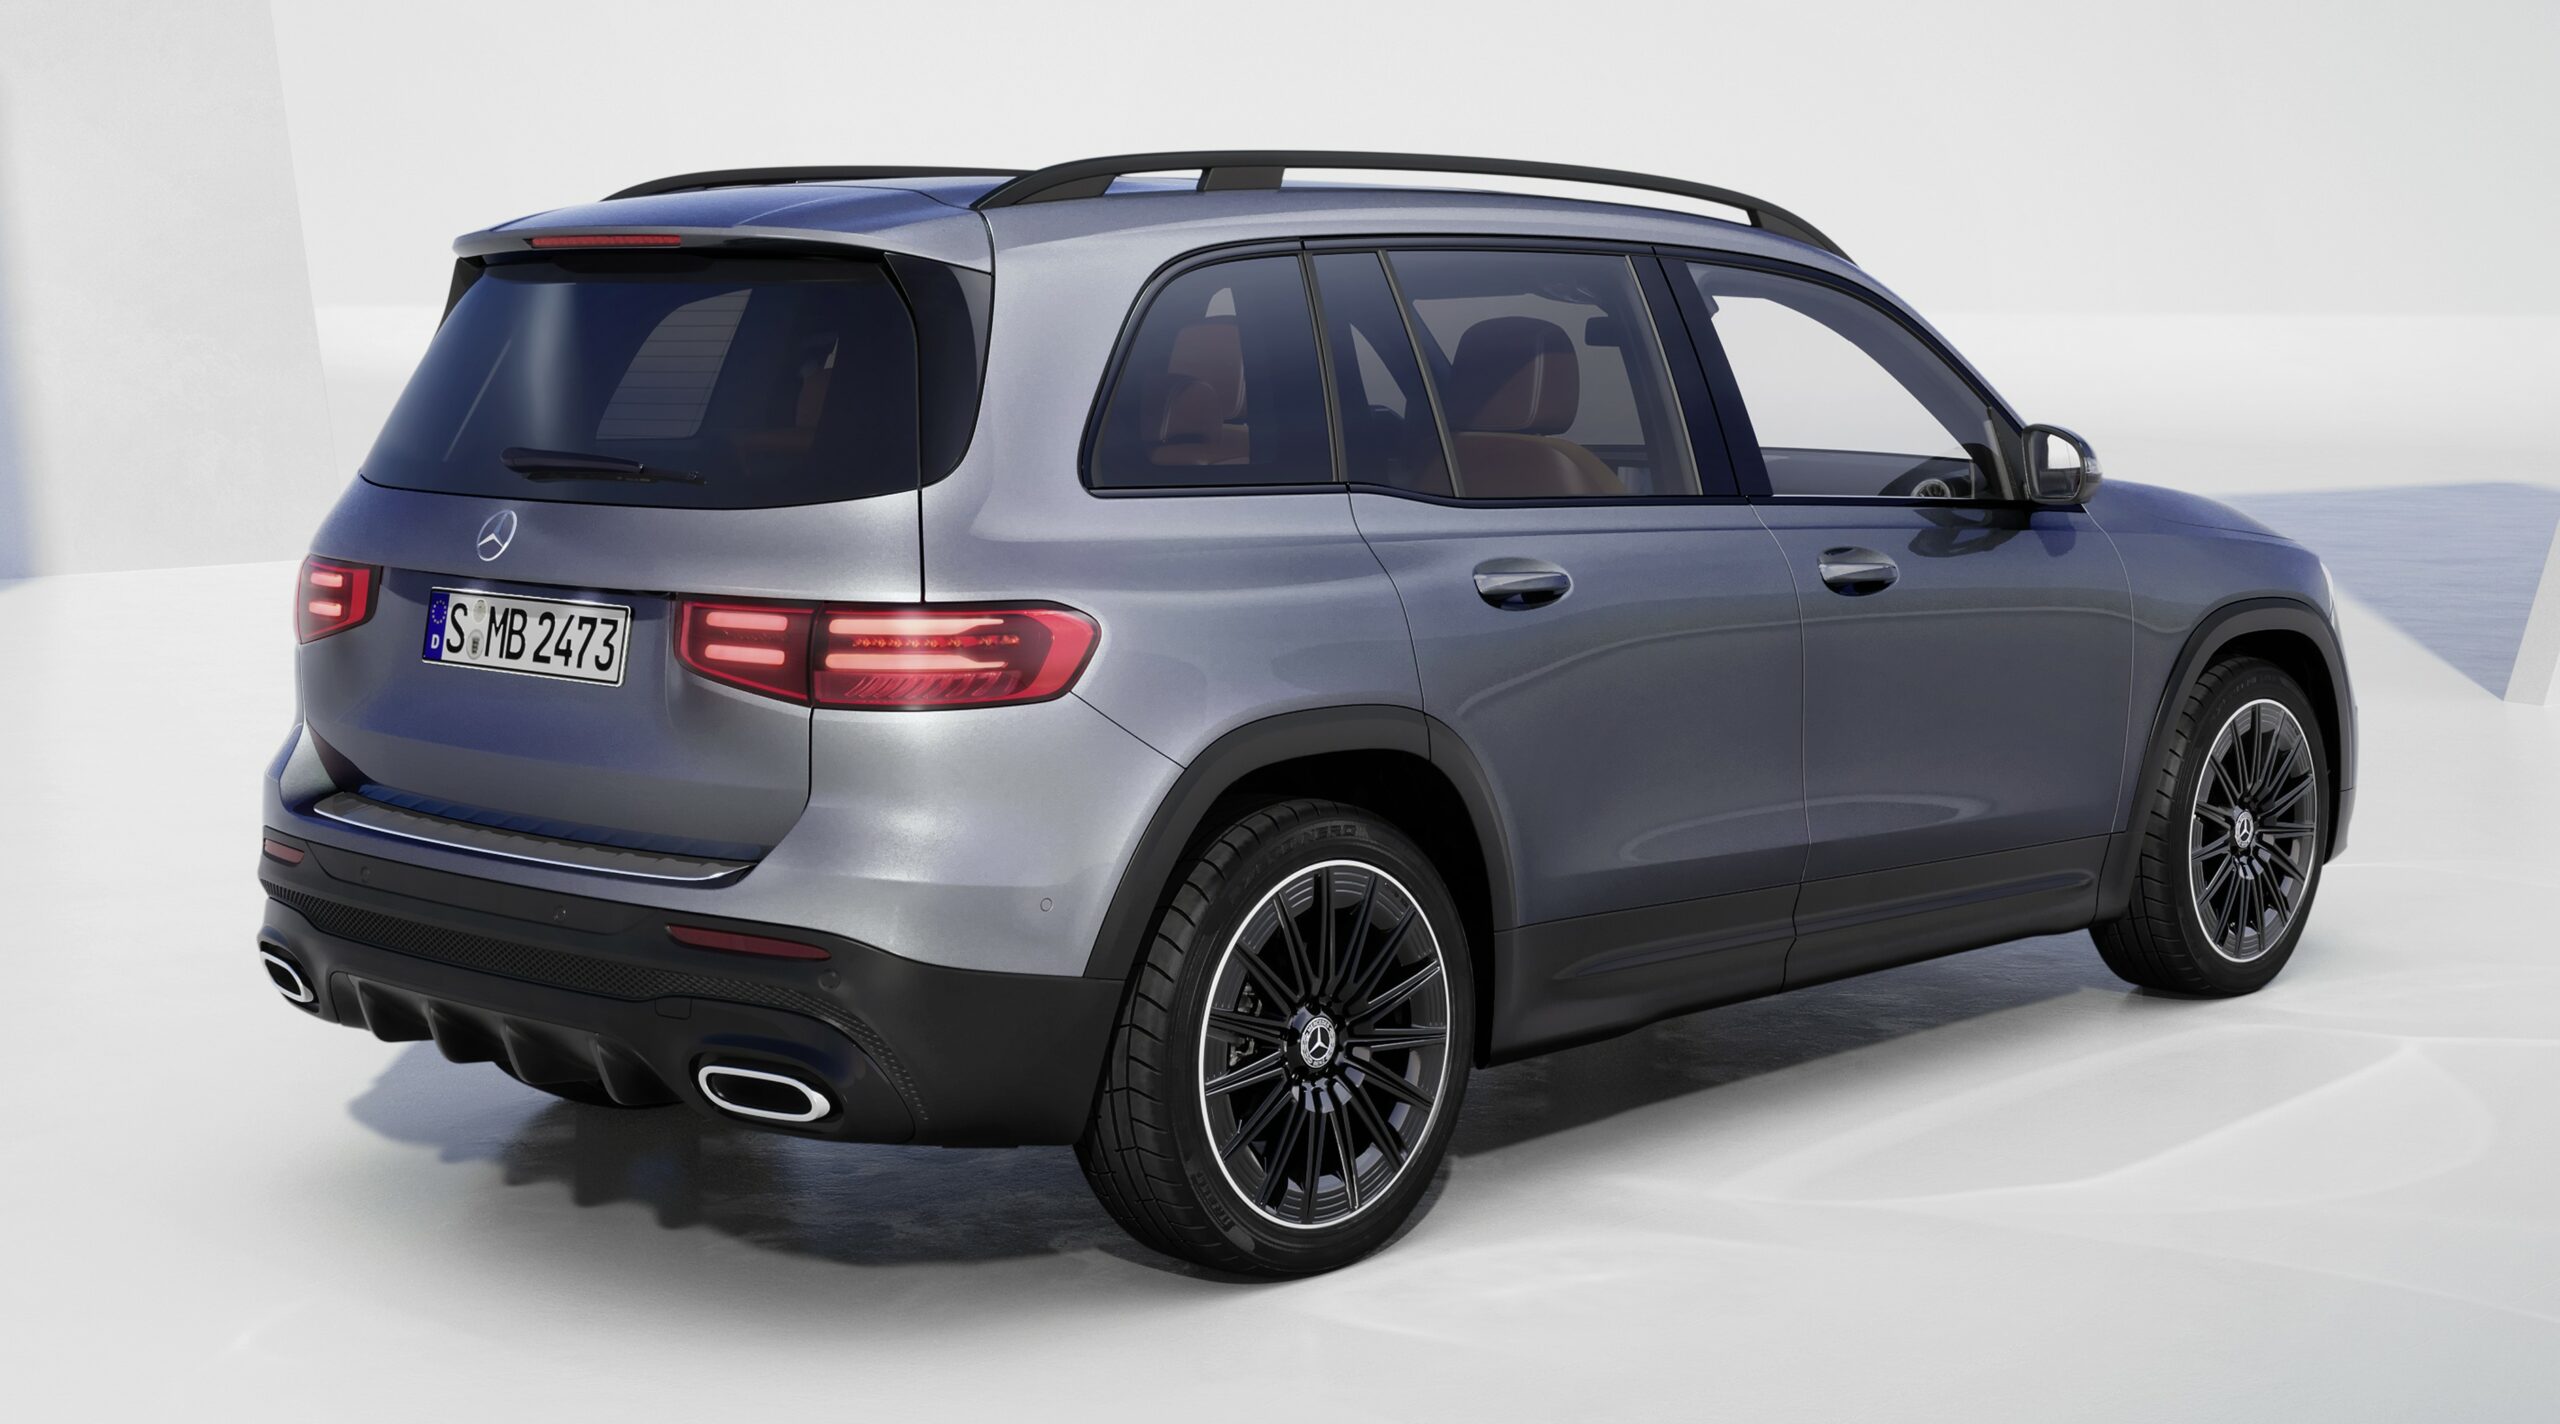 mercedes-benz, mercedes-benz glb, facelifted mercedes-benz glb revealed – new features and electrified engines